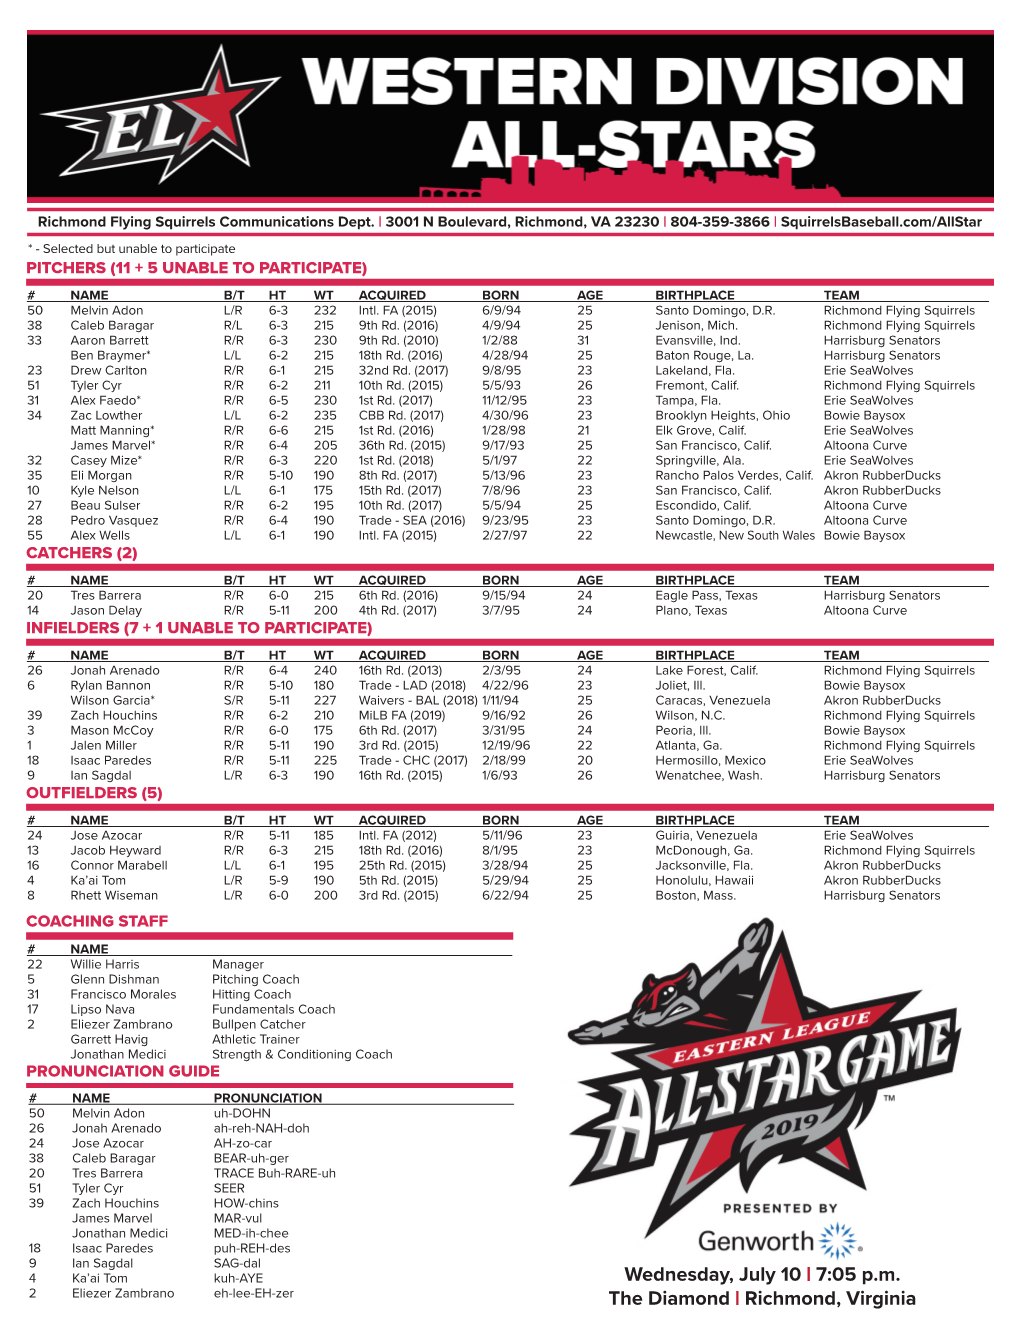 Western Division Roster